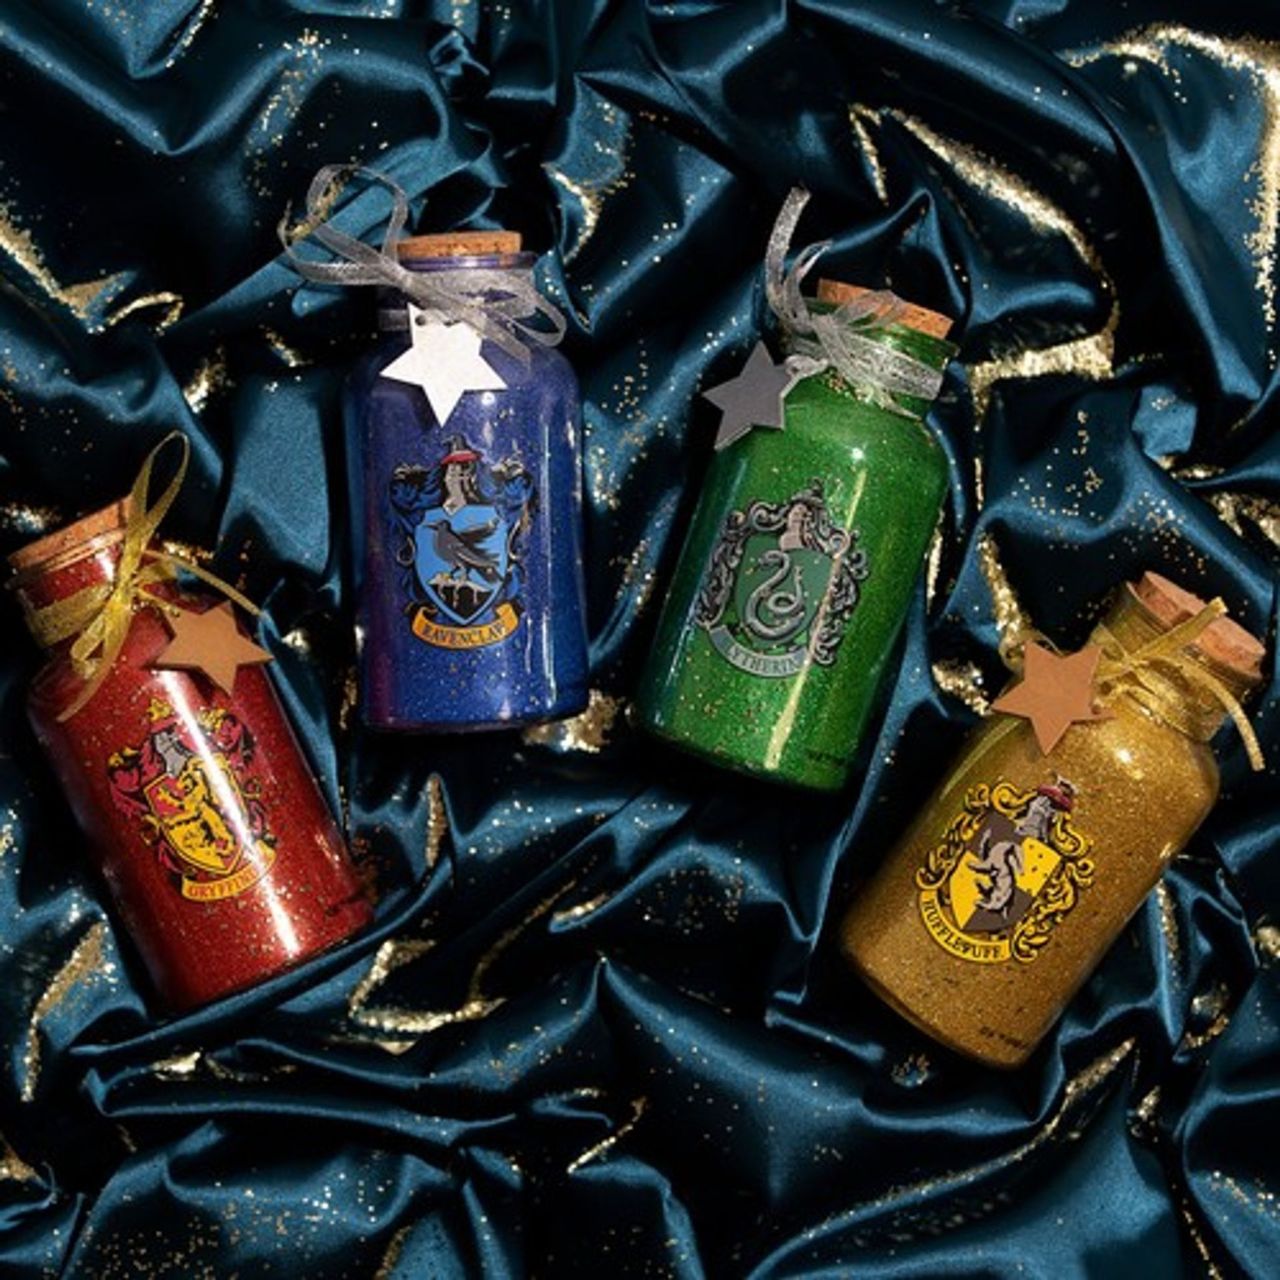 Harry Potter LED Light Up Glass Jar House - Gryffindor  Lumos maxima! Light up your home this Christmas with these LED glass jar lights. With a glitter design and featuring all four houses, these accessories are sure to add a sprinkle of magic.